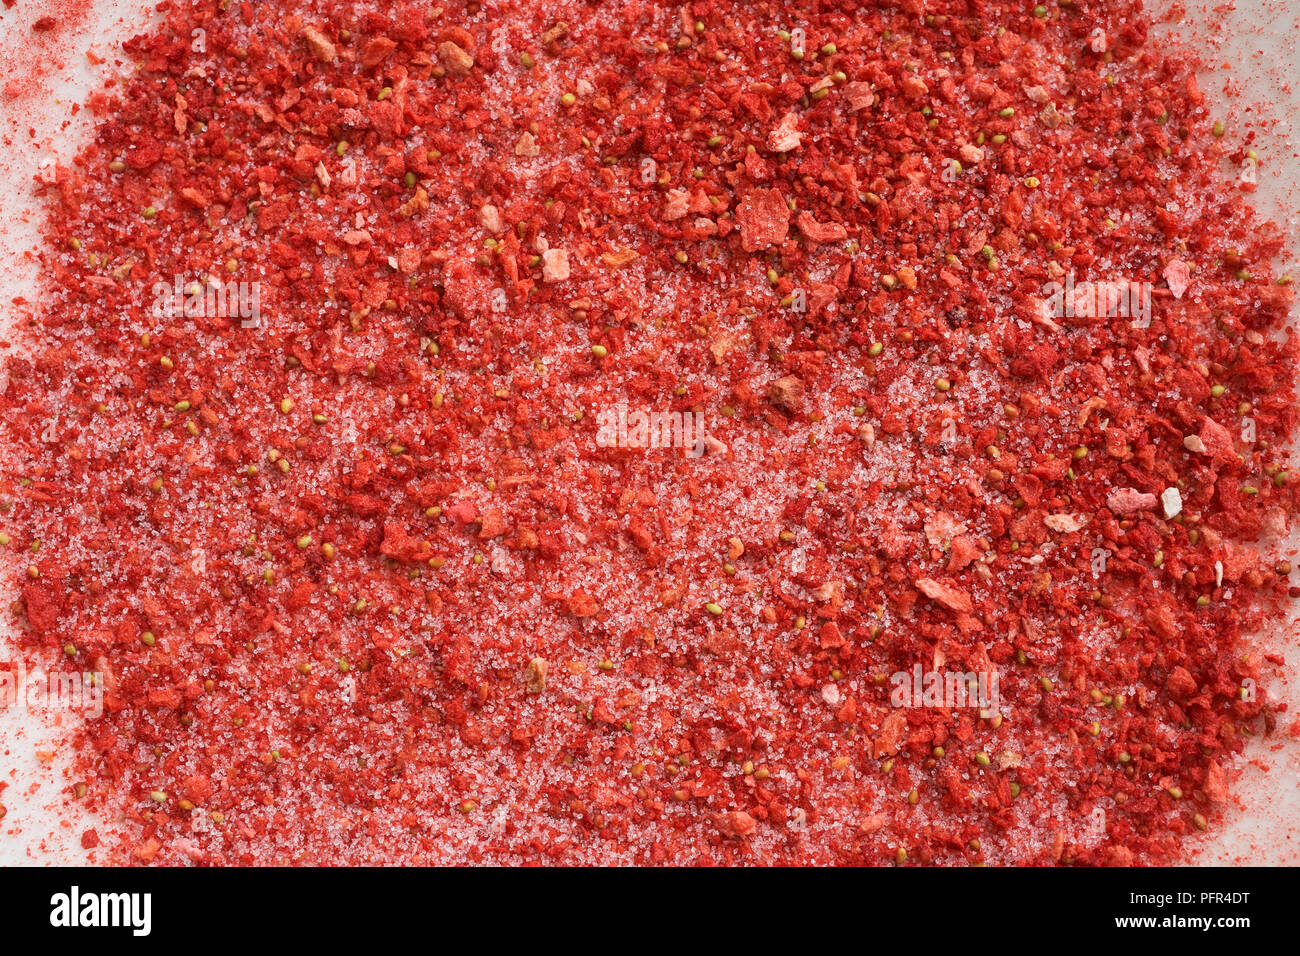 Dried strawberries, crushed and mixed with icing sugar Stock Photo